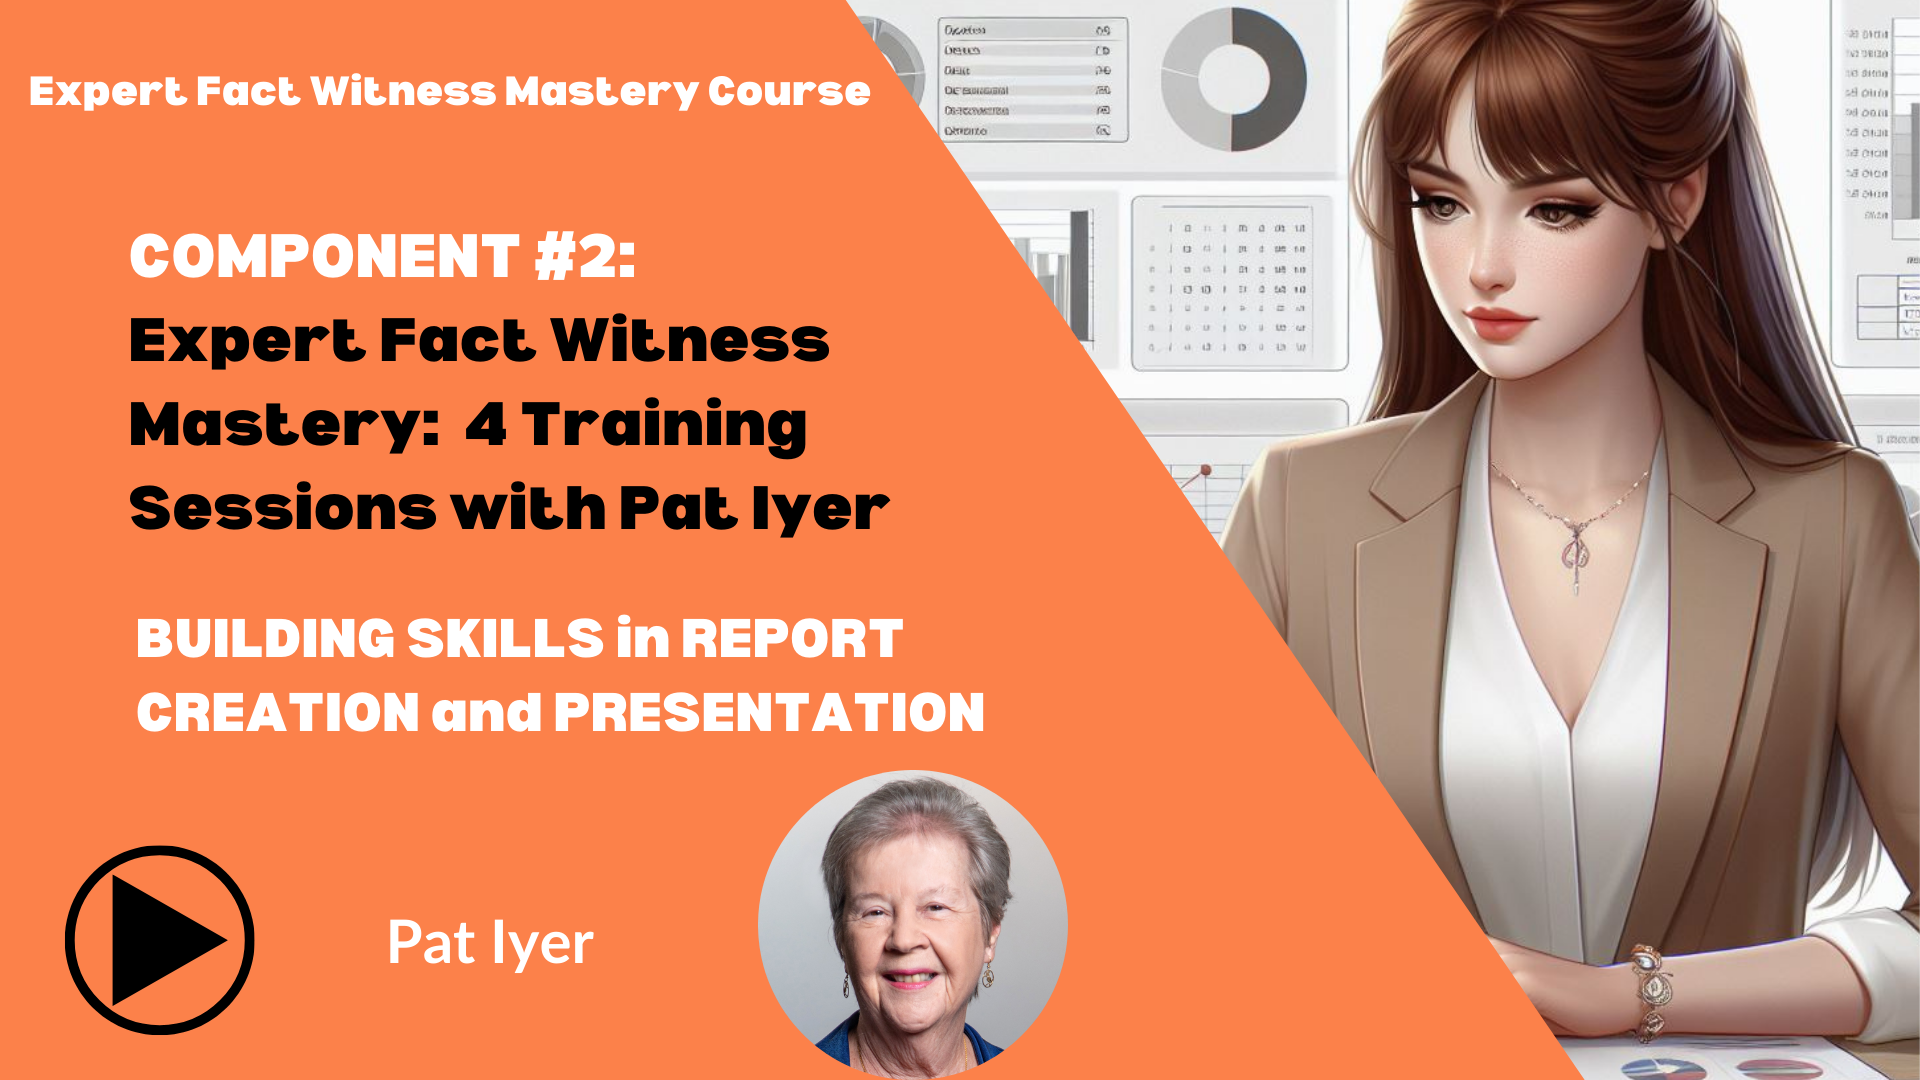 Pat Iyer - C2 Expert Fact Witness Mastery Course - Building Skills in Report Writing